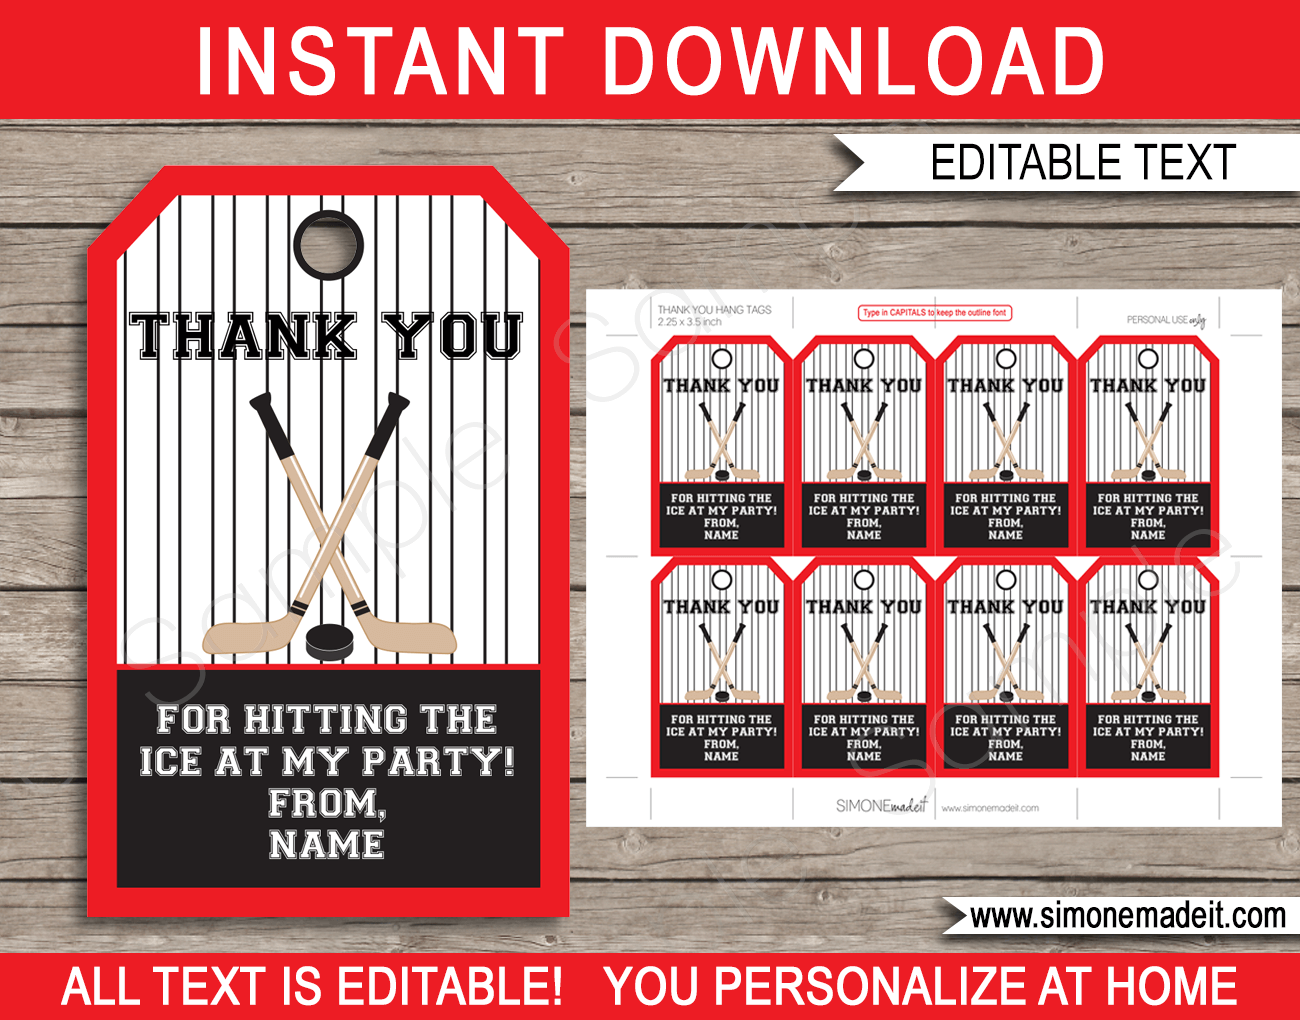 Hockey Birthday Party Favor Tags Template | Printable Thank You Tags | Editable DIY Template | $3.00 INSTANT DOWNLOAD via SIMONEmadeit.com